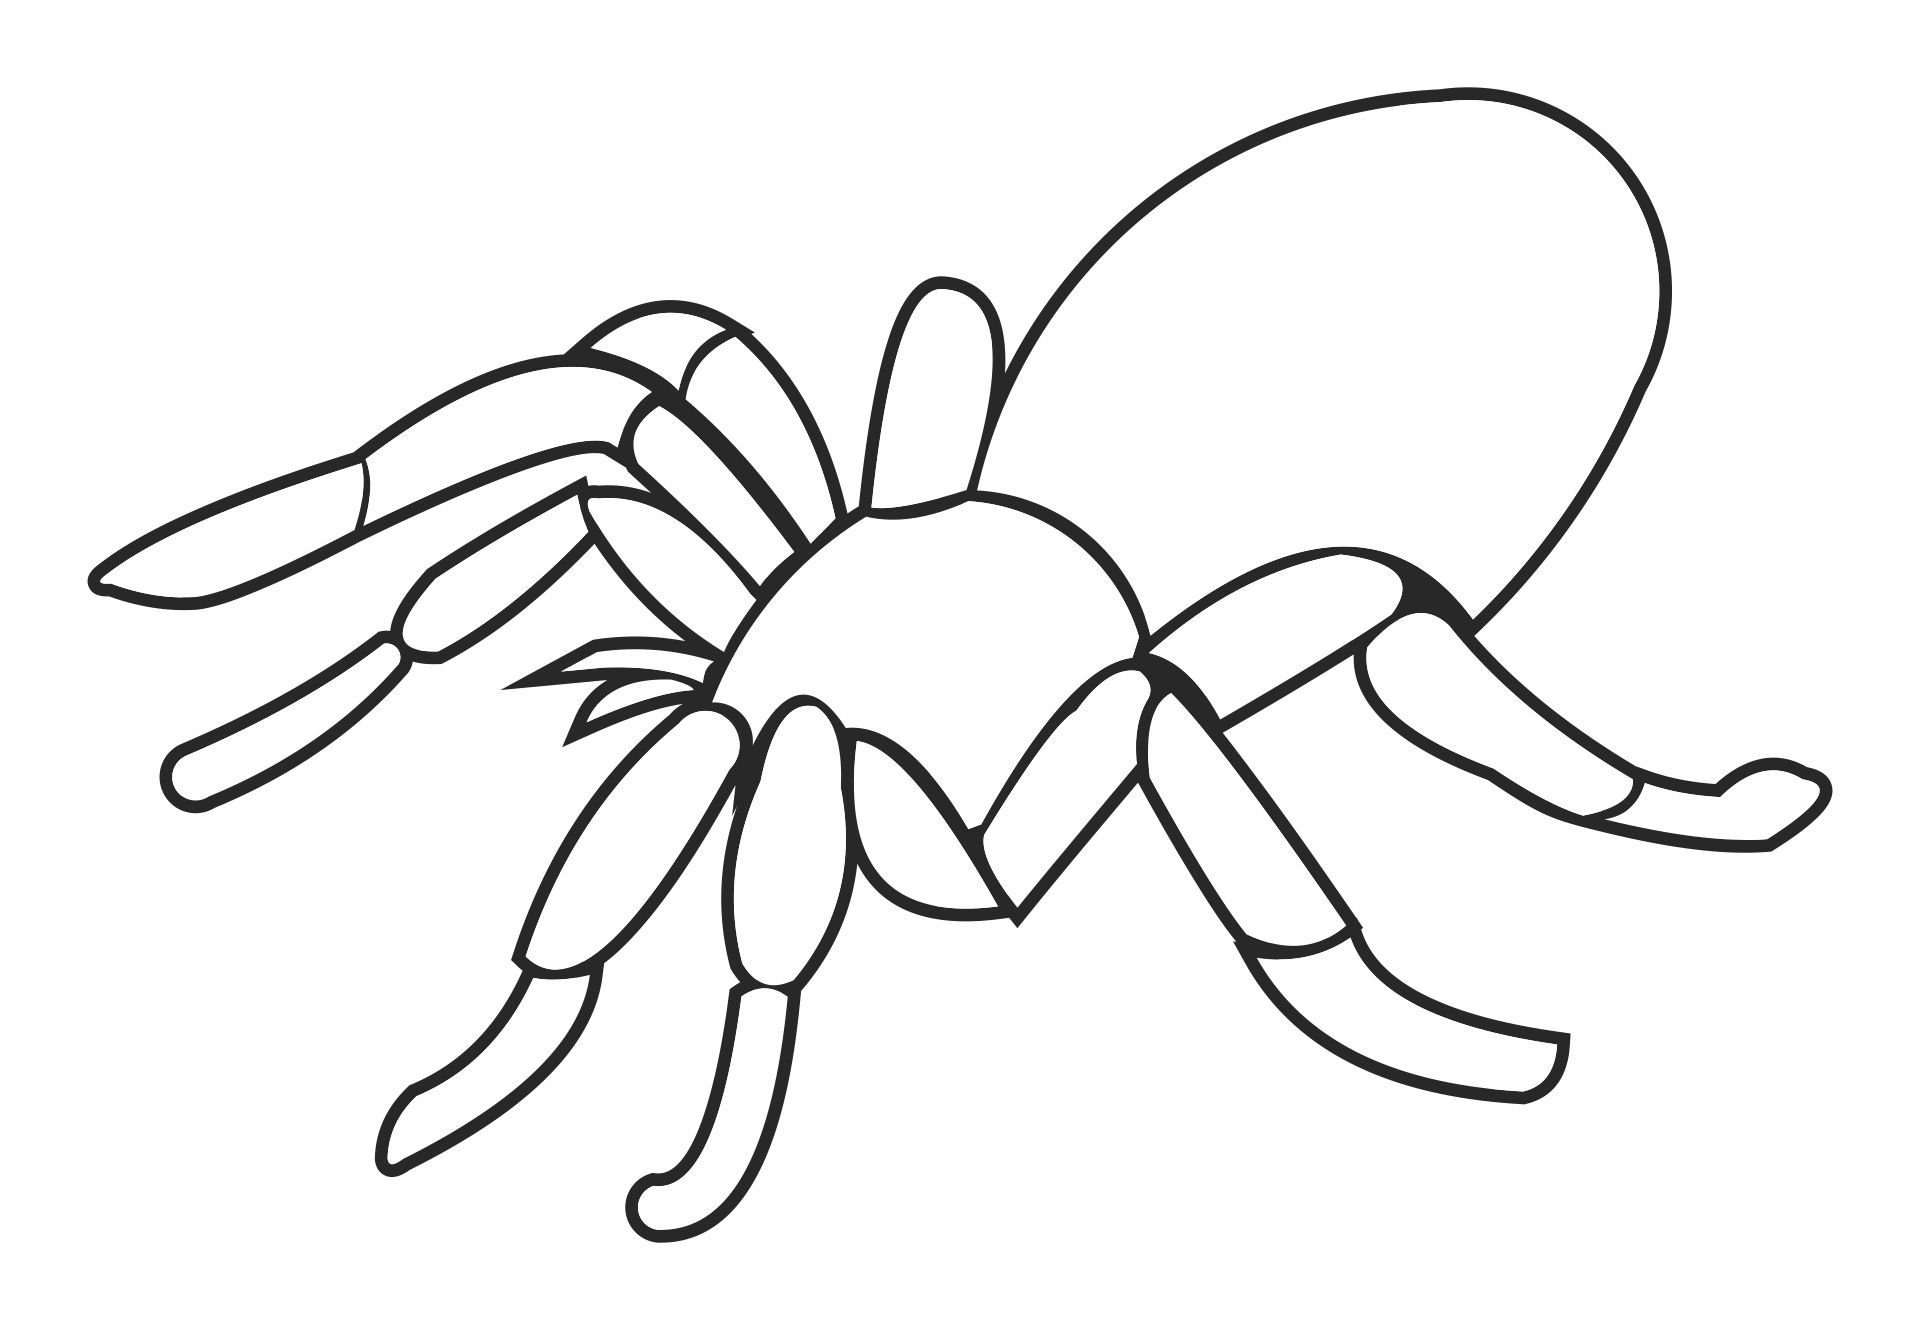 Printable Coloring Pages Of Spiders